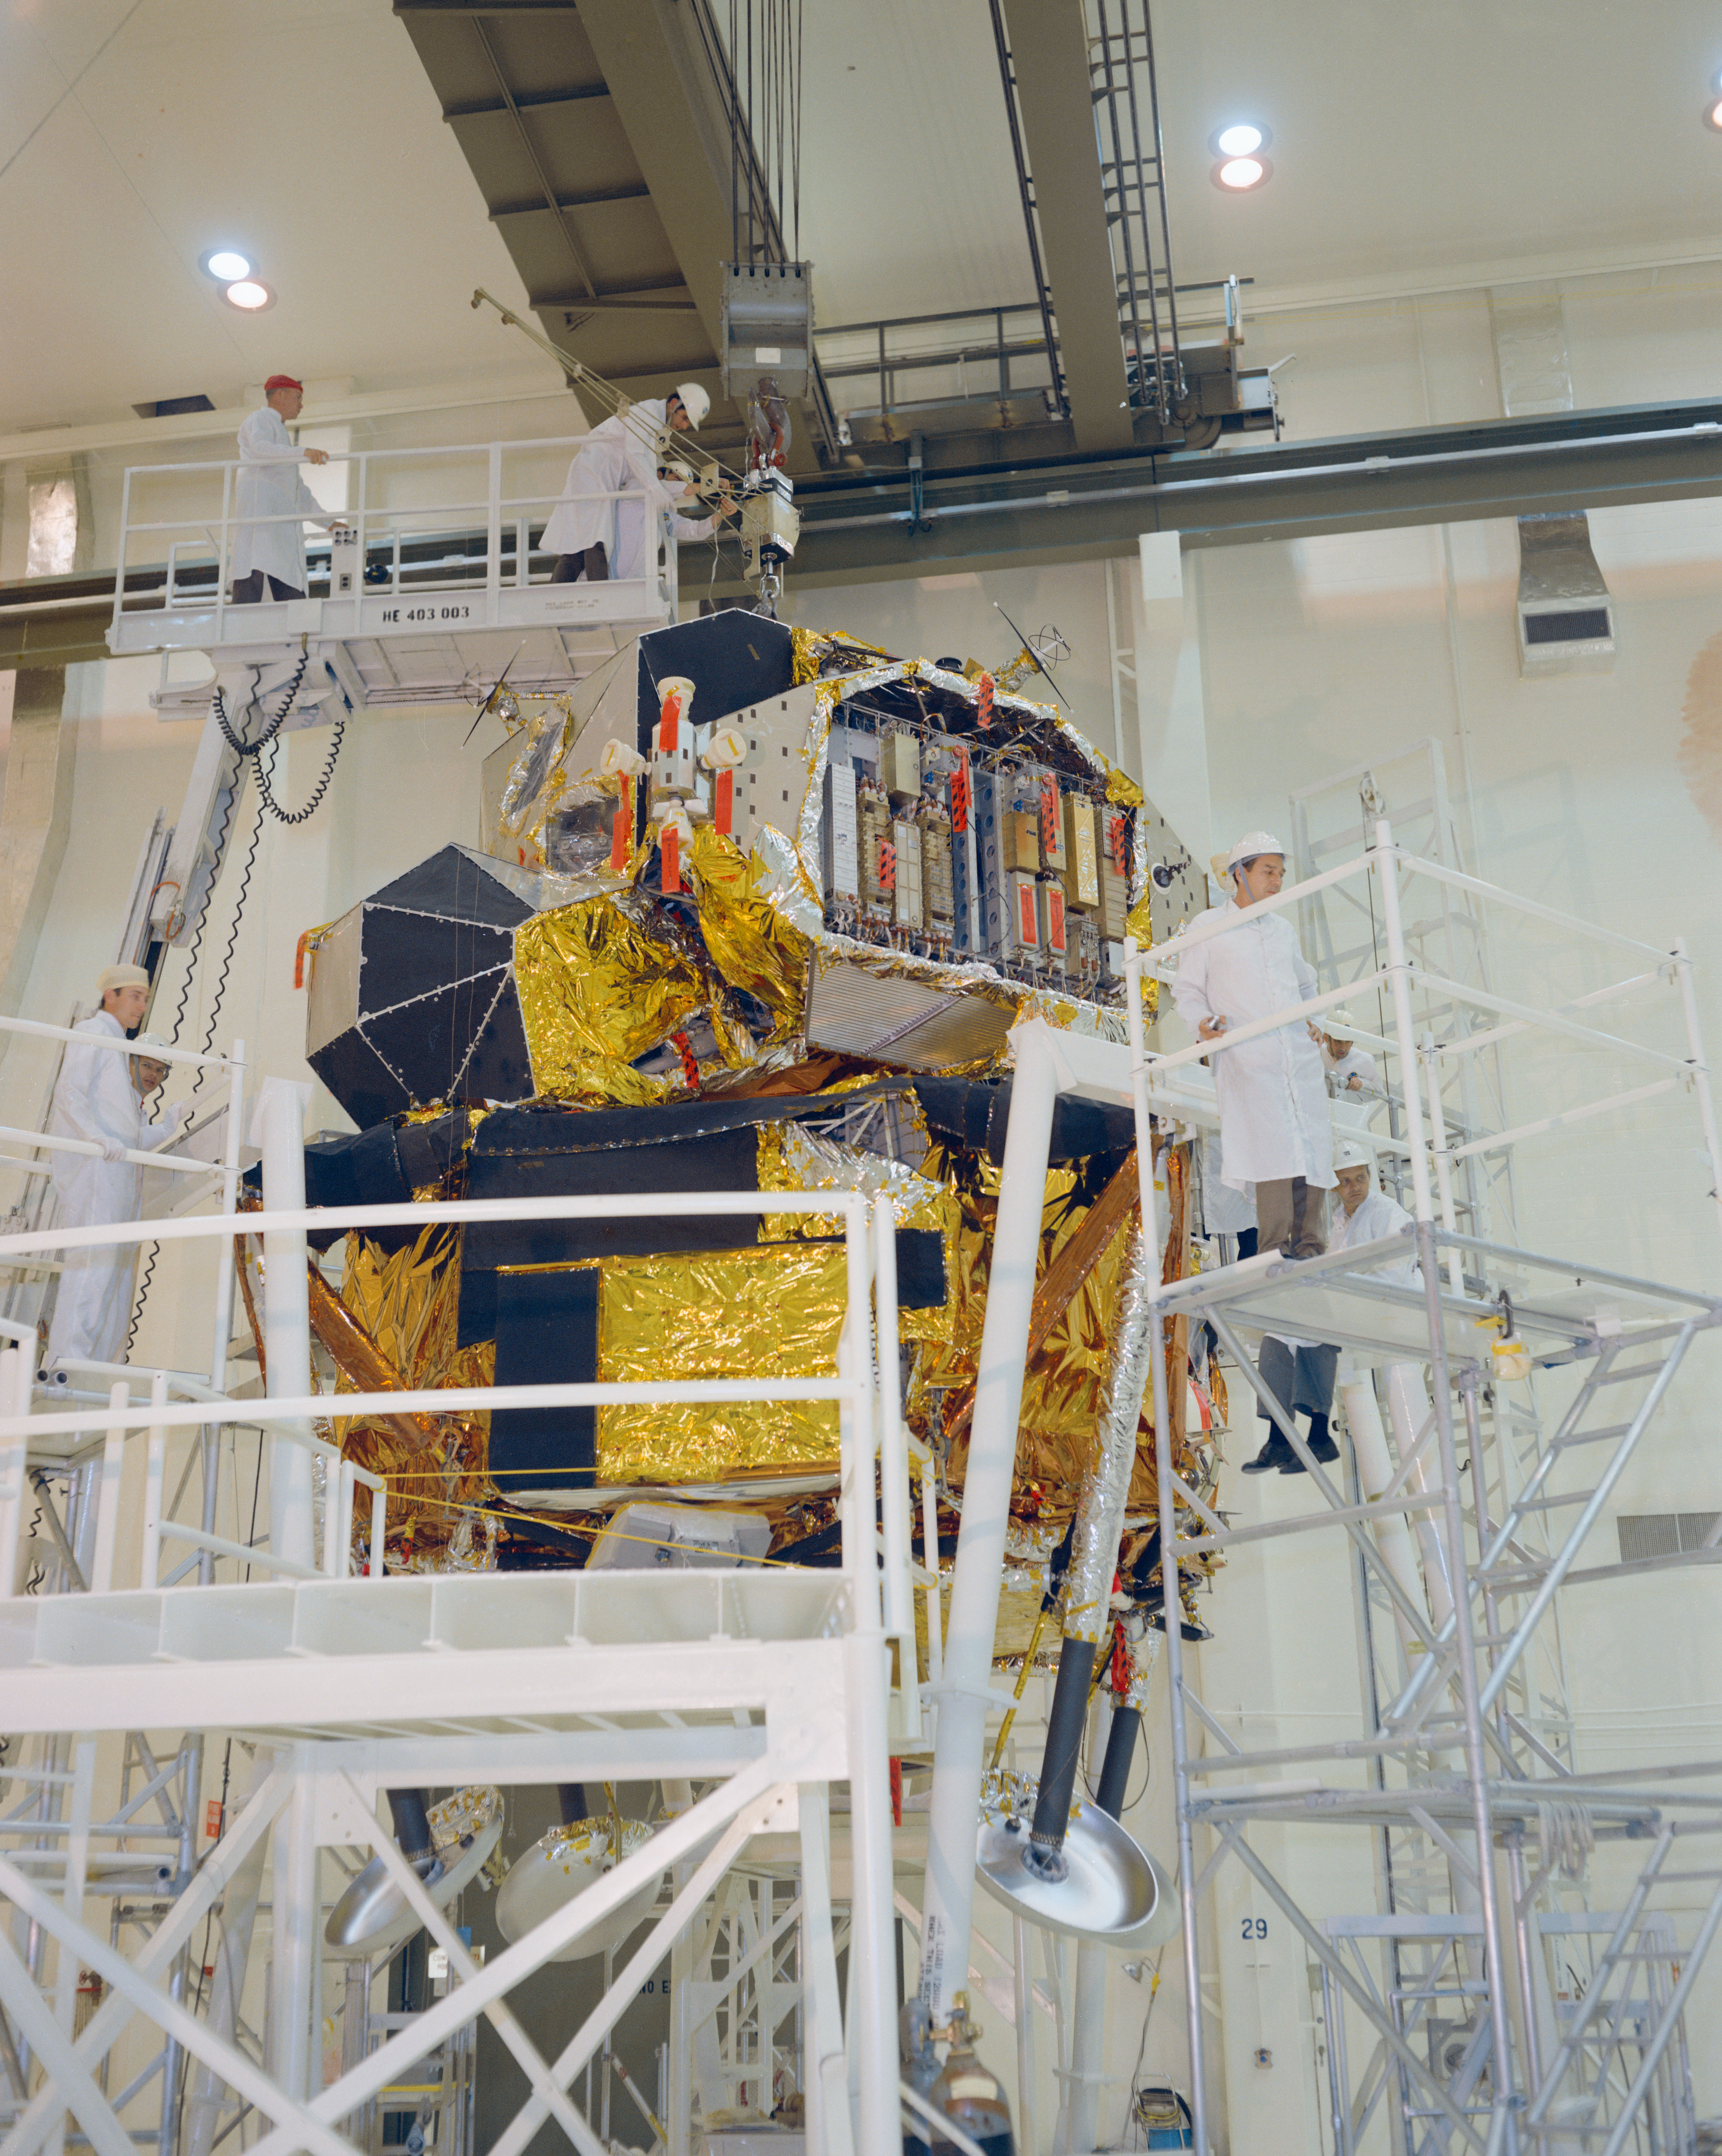 In the Manned Spacecraft Operations Building (MSOB) at NASA's Kennedy Space Center (KSC) in Florida, workers complete attaching the landing legs to the Apollo 11 Lunar Module (LM)